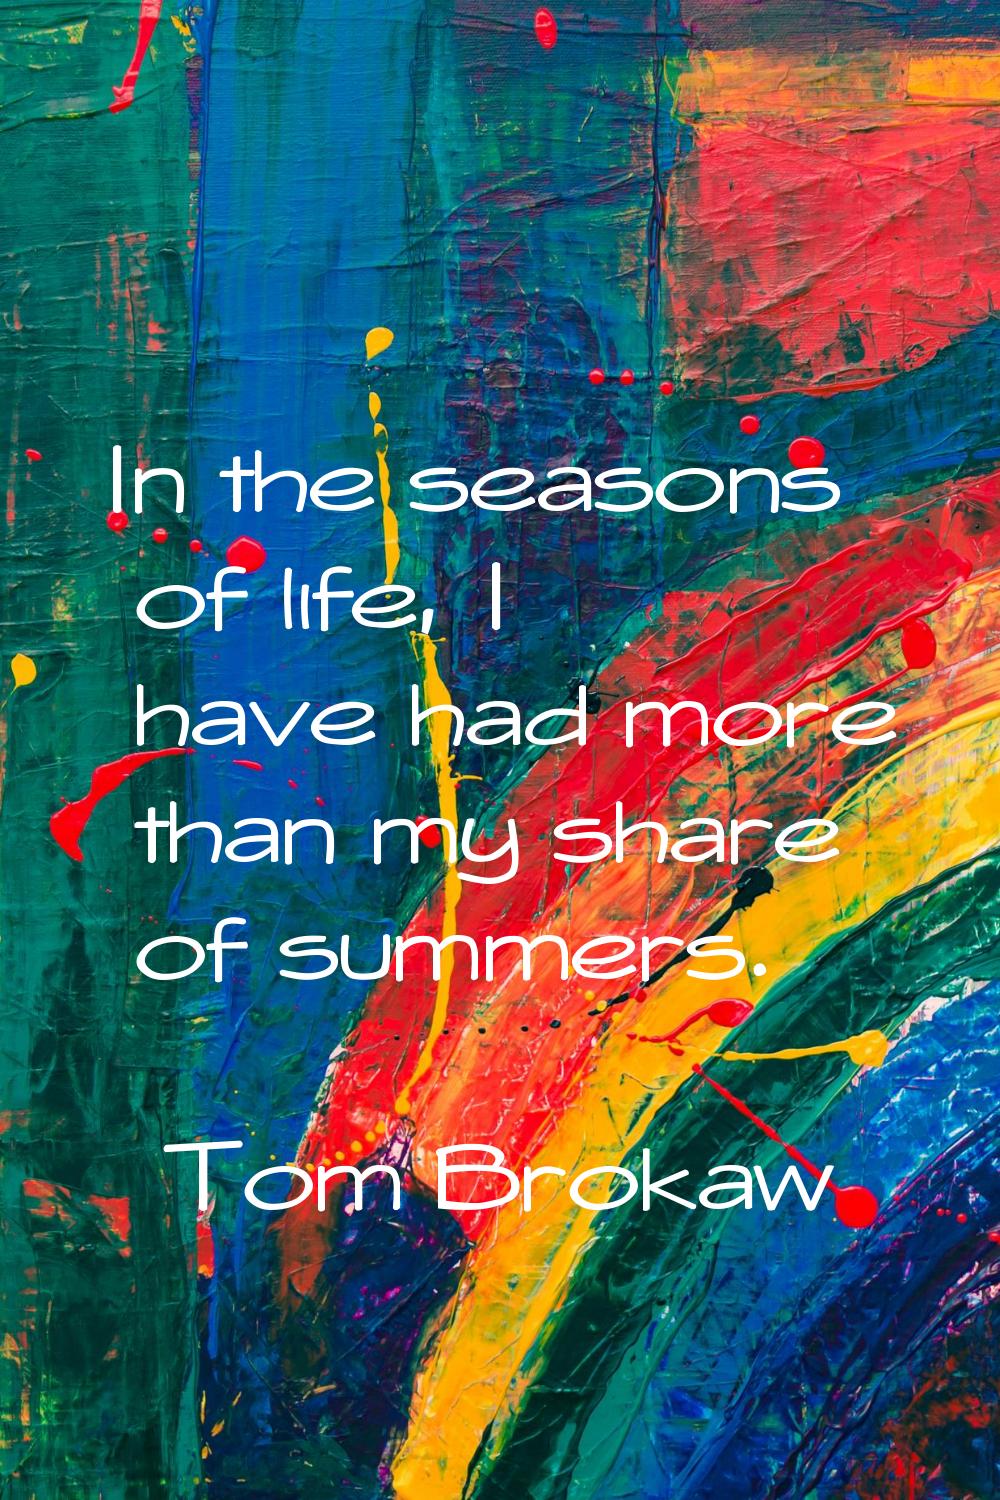 In the seasons of life, I have had more than my share of summers.